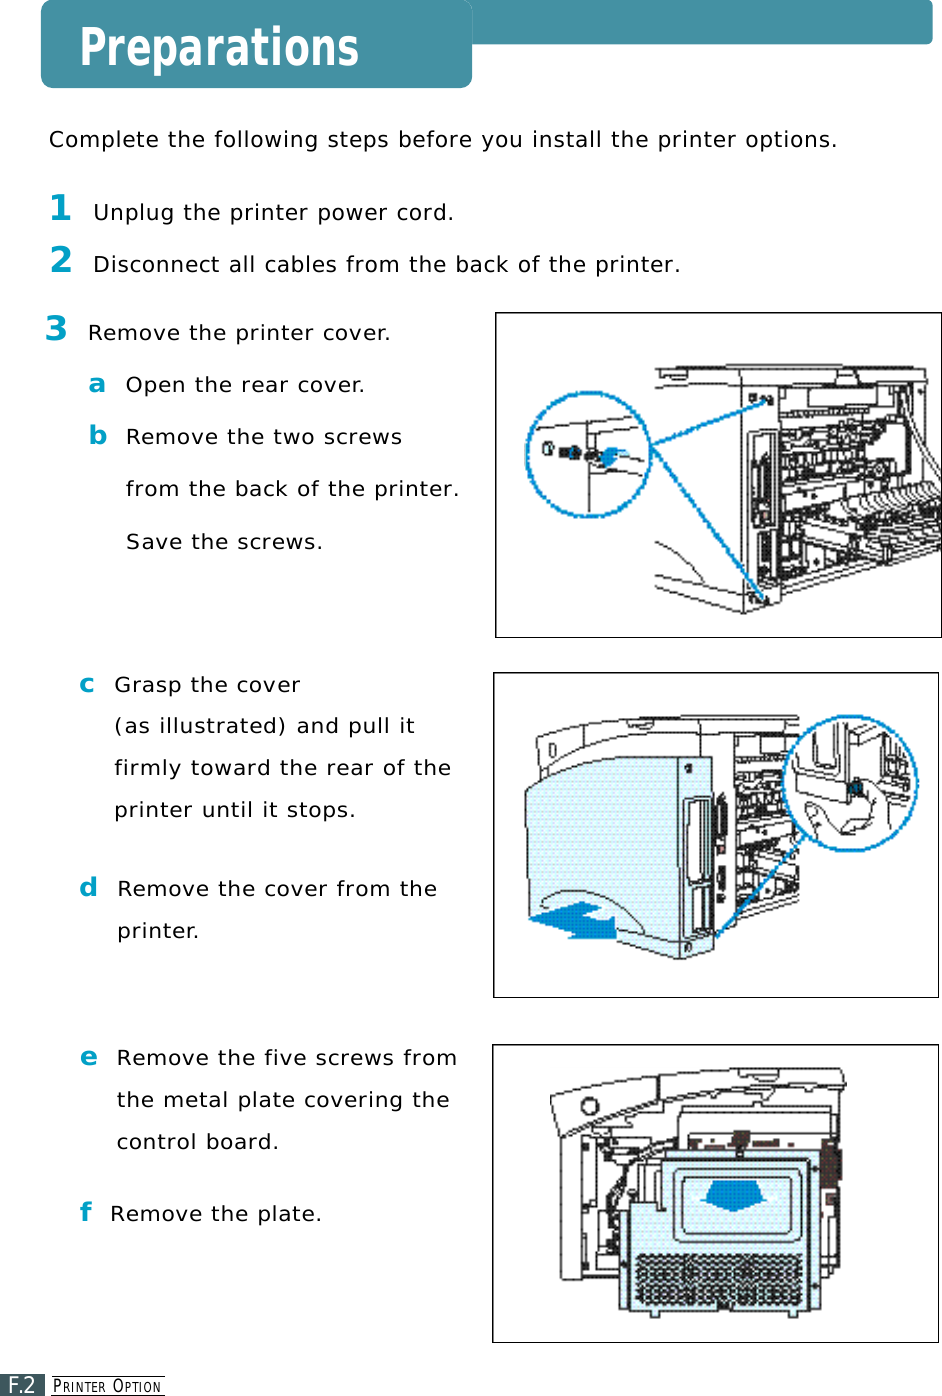 PR I N T E R OP T I O NF.2Preparations3Re m o ve the printer cove r. aOpen the rear cove r.bRe m o ve the two screwsfrom the back of the printer. S ave the screws.cG rasp the cove r(as illustrated) and pull itfirmly toward the rear of theprinter until it stops. dRe m ove the cover from thep r i n t e r.Complete the following steps before you install the printer options.1Unplug the printer power cord.2Disconnect all cables from the back of the printer.eRe m ove the five screws fromthe metal plate covering thecontrol board.fRe m ove the plate.